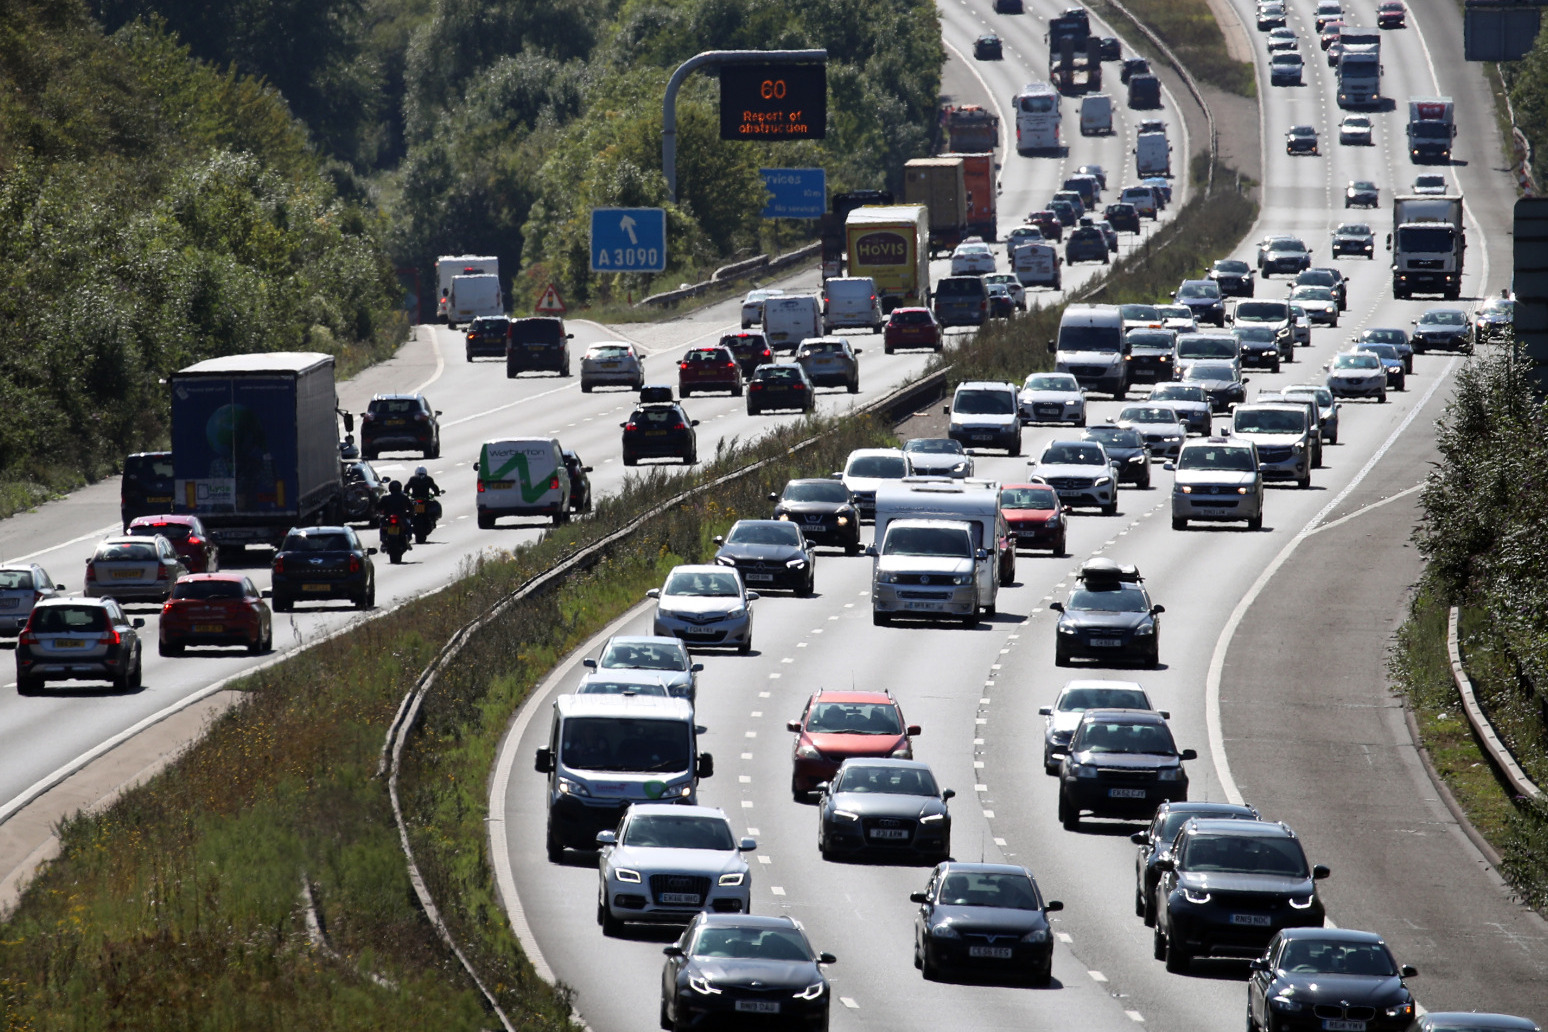 Average price paid for motor insurance rose by 8% in final months of 2022 